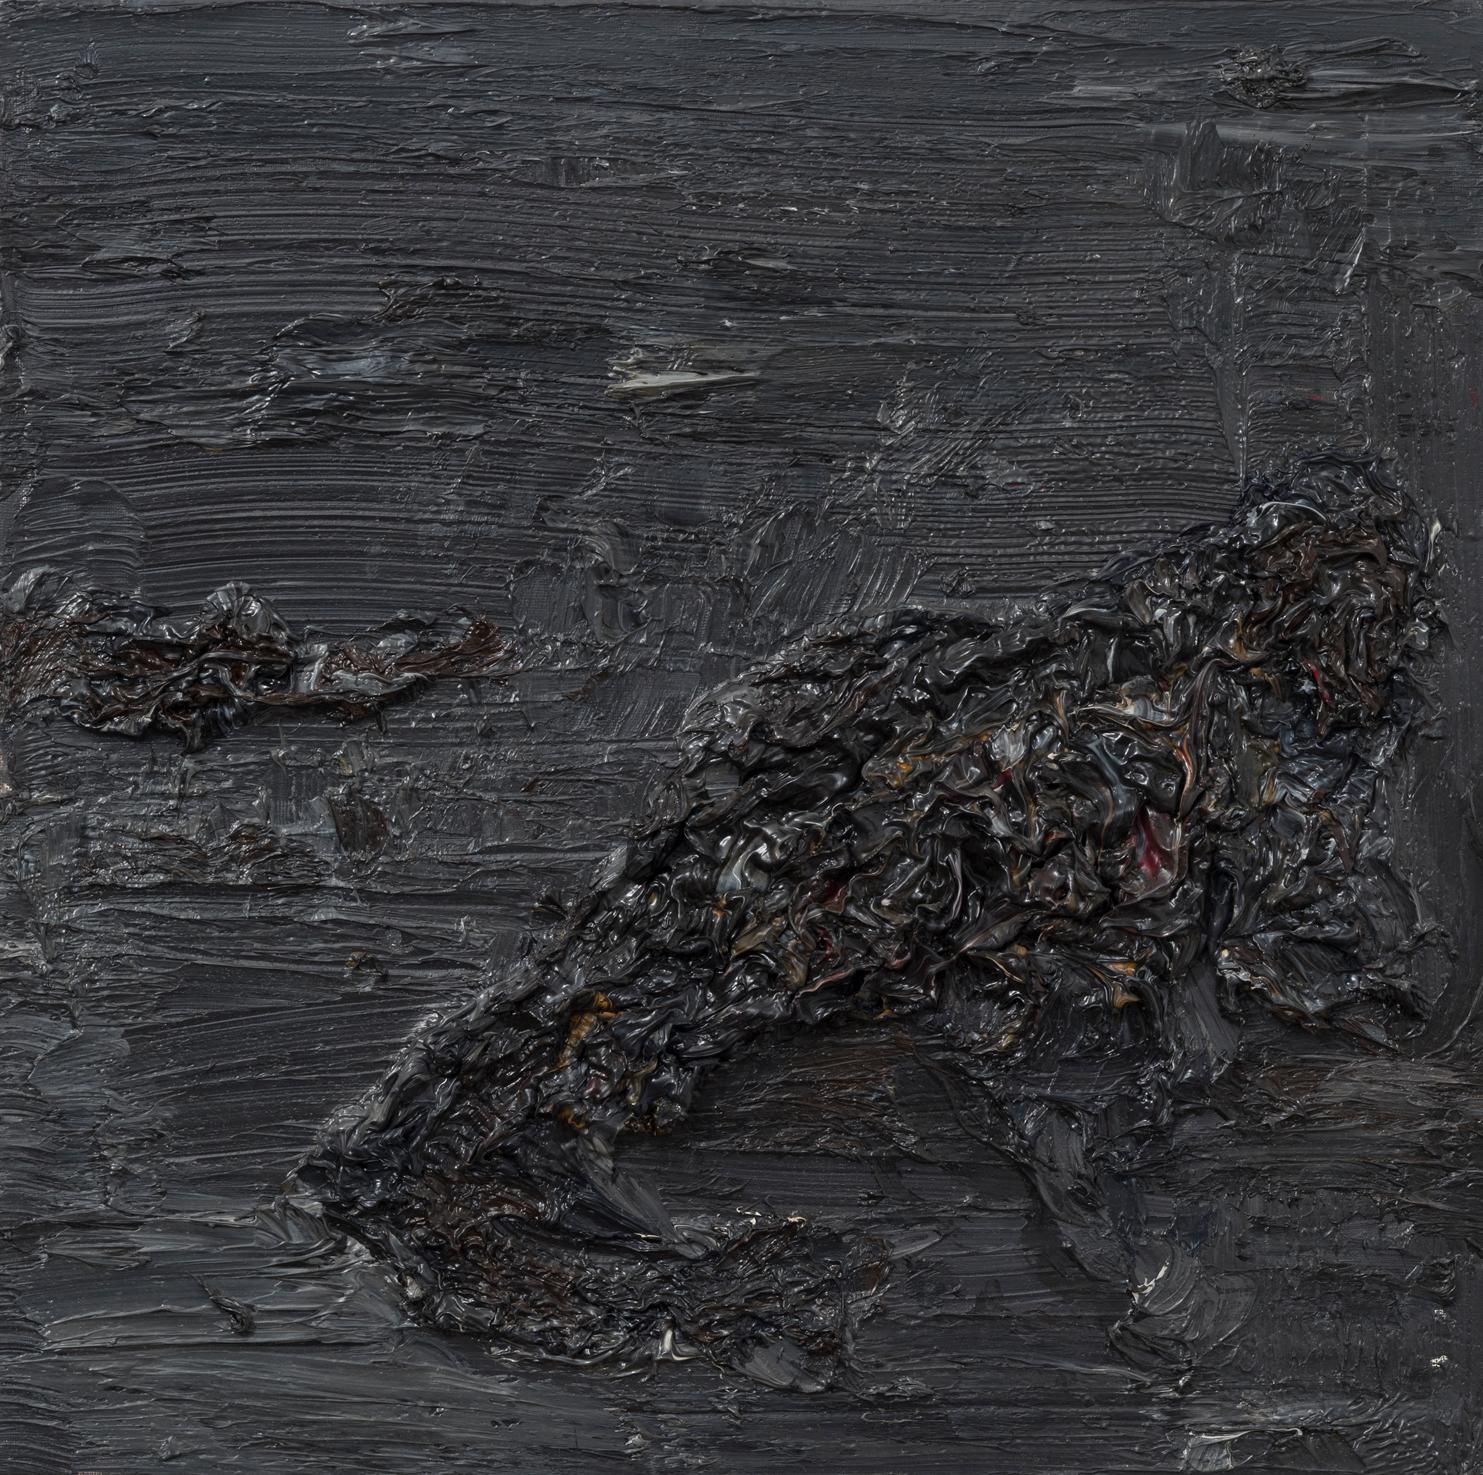 Zsolt Berszán Landscape Painting - Untitled (Decomposition) - Contemporary, Abstract, Black, Dark Gray, Organic